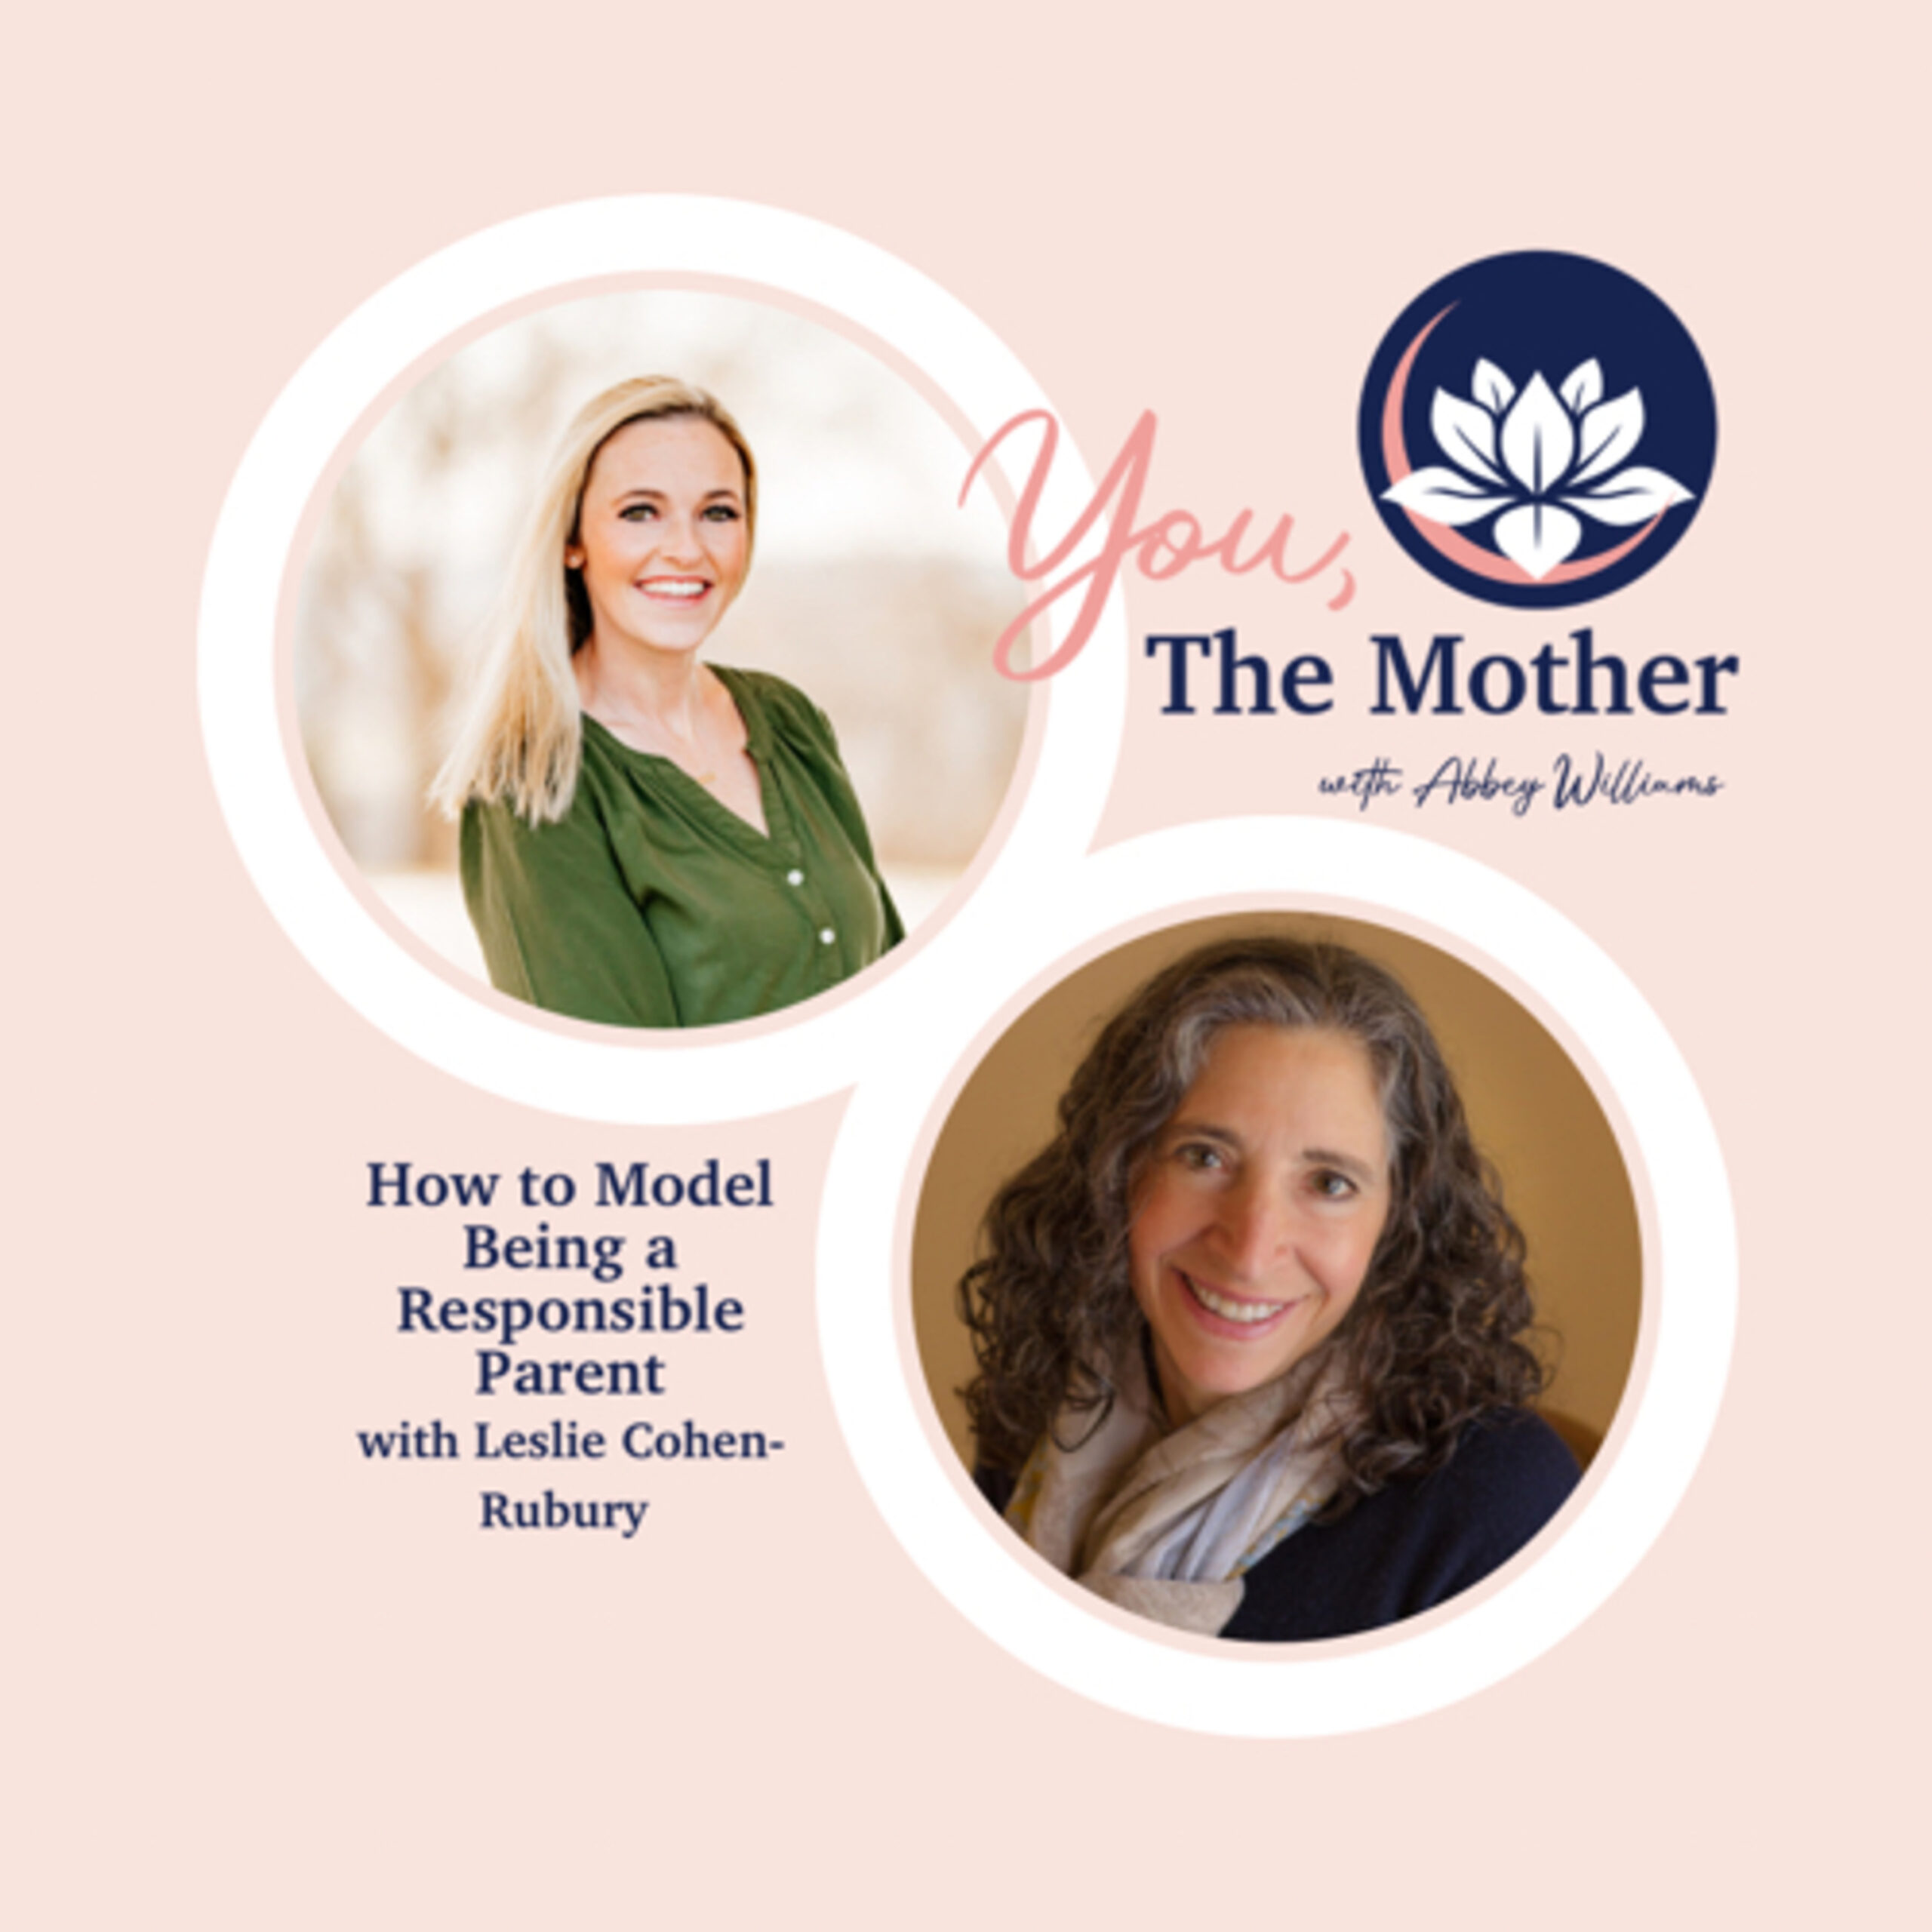 How to Model Being a Responsible Parent with Leslie Cohen-Rubury